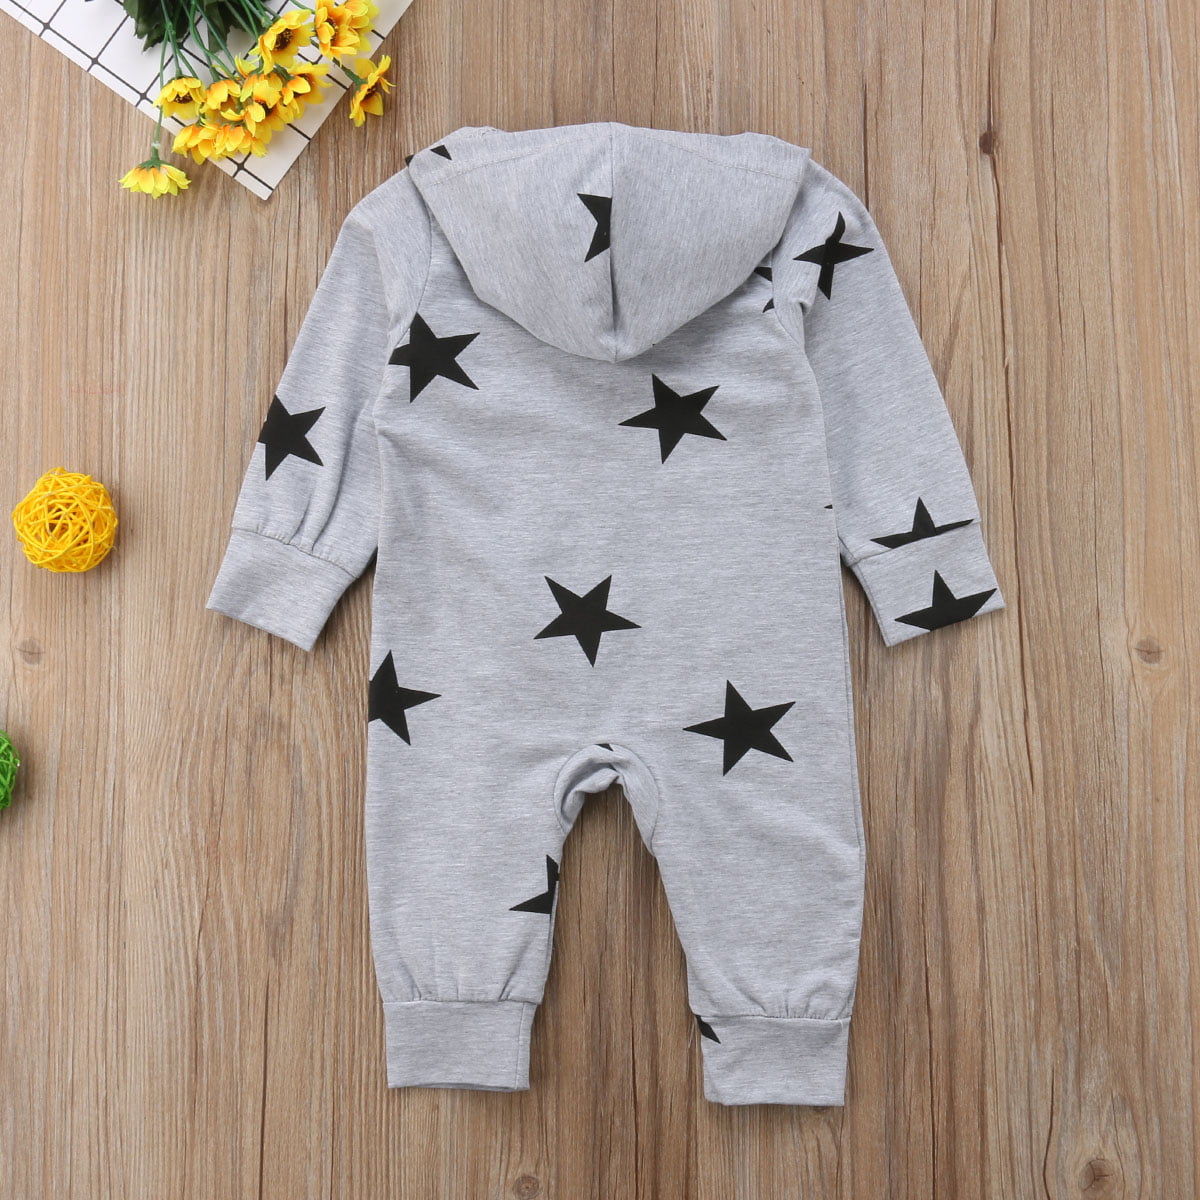 DIGOOD Toddler Newborn Baby Boys Girls Arrow Print Romper Jumpsuit Outfits Clothes For 0-3 Years old Baby